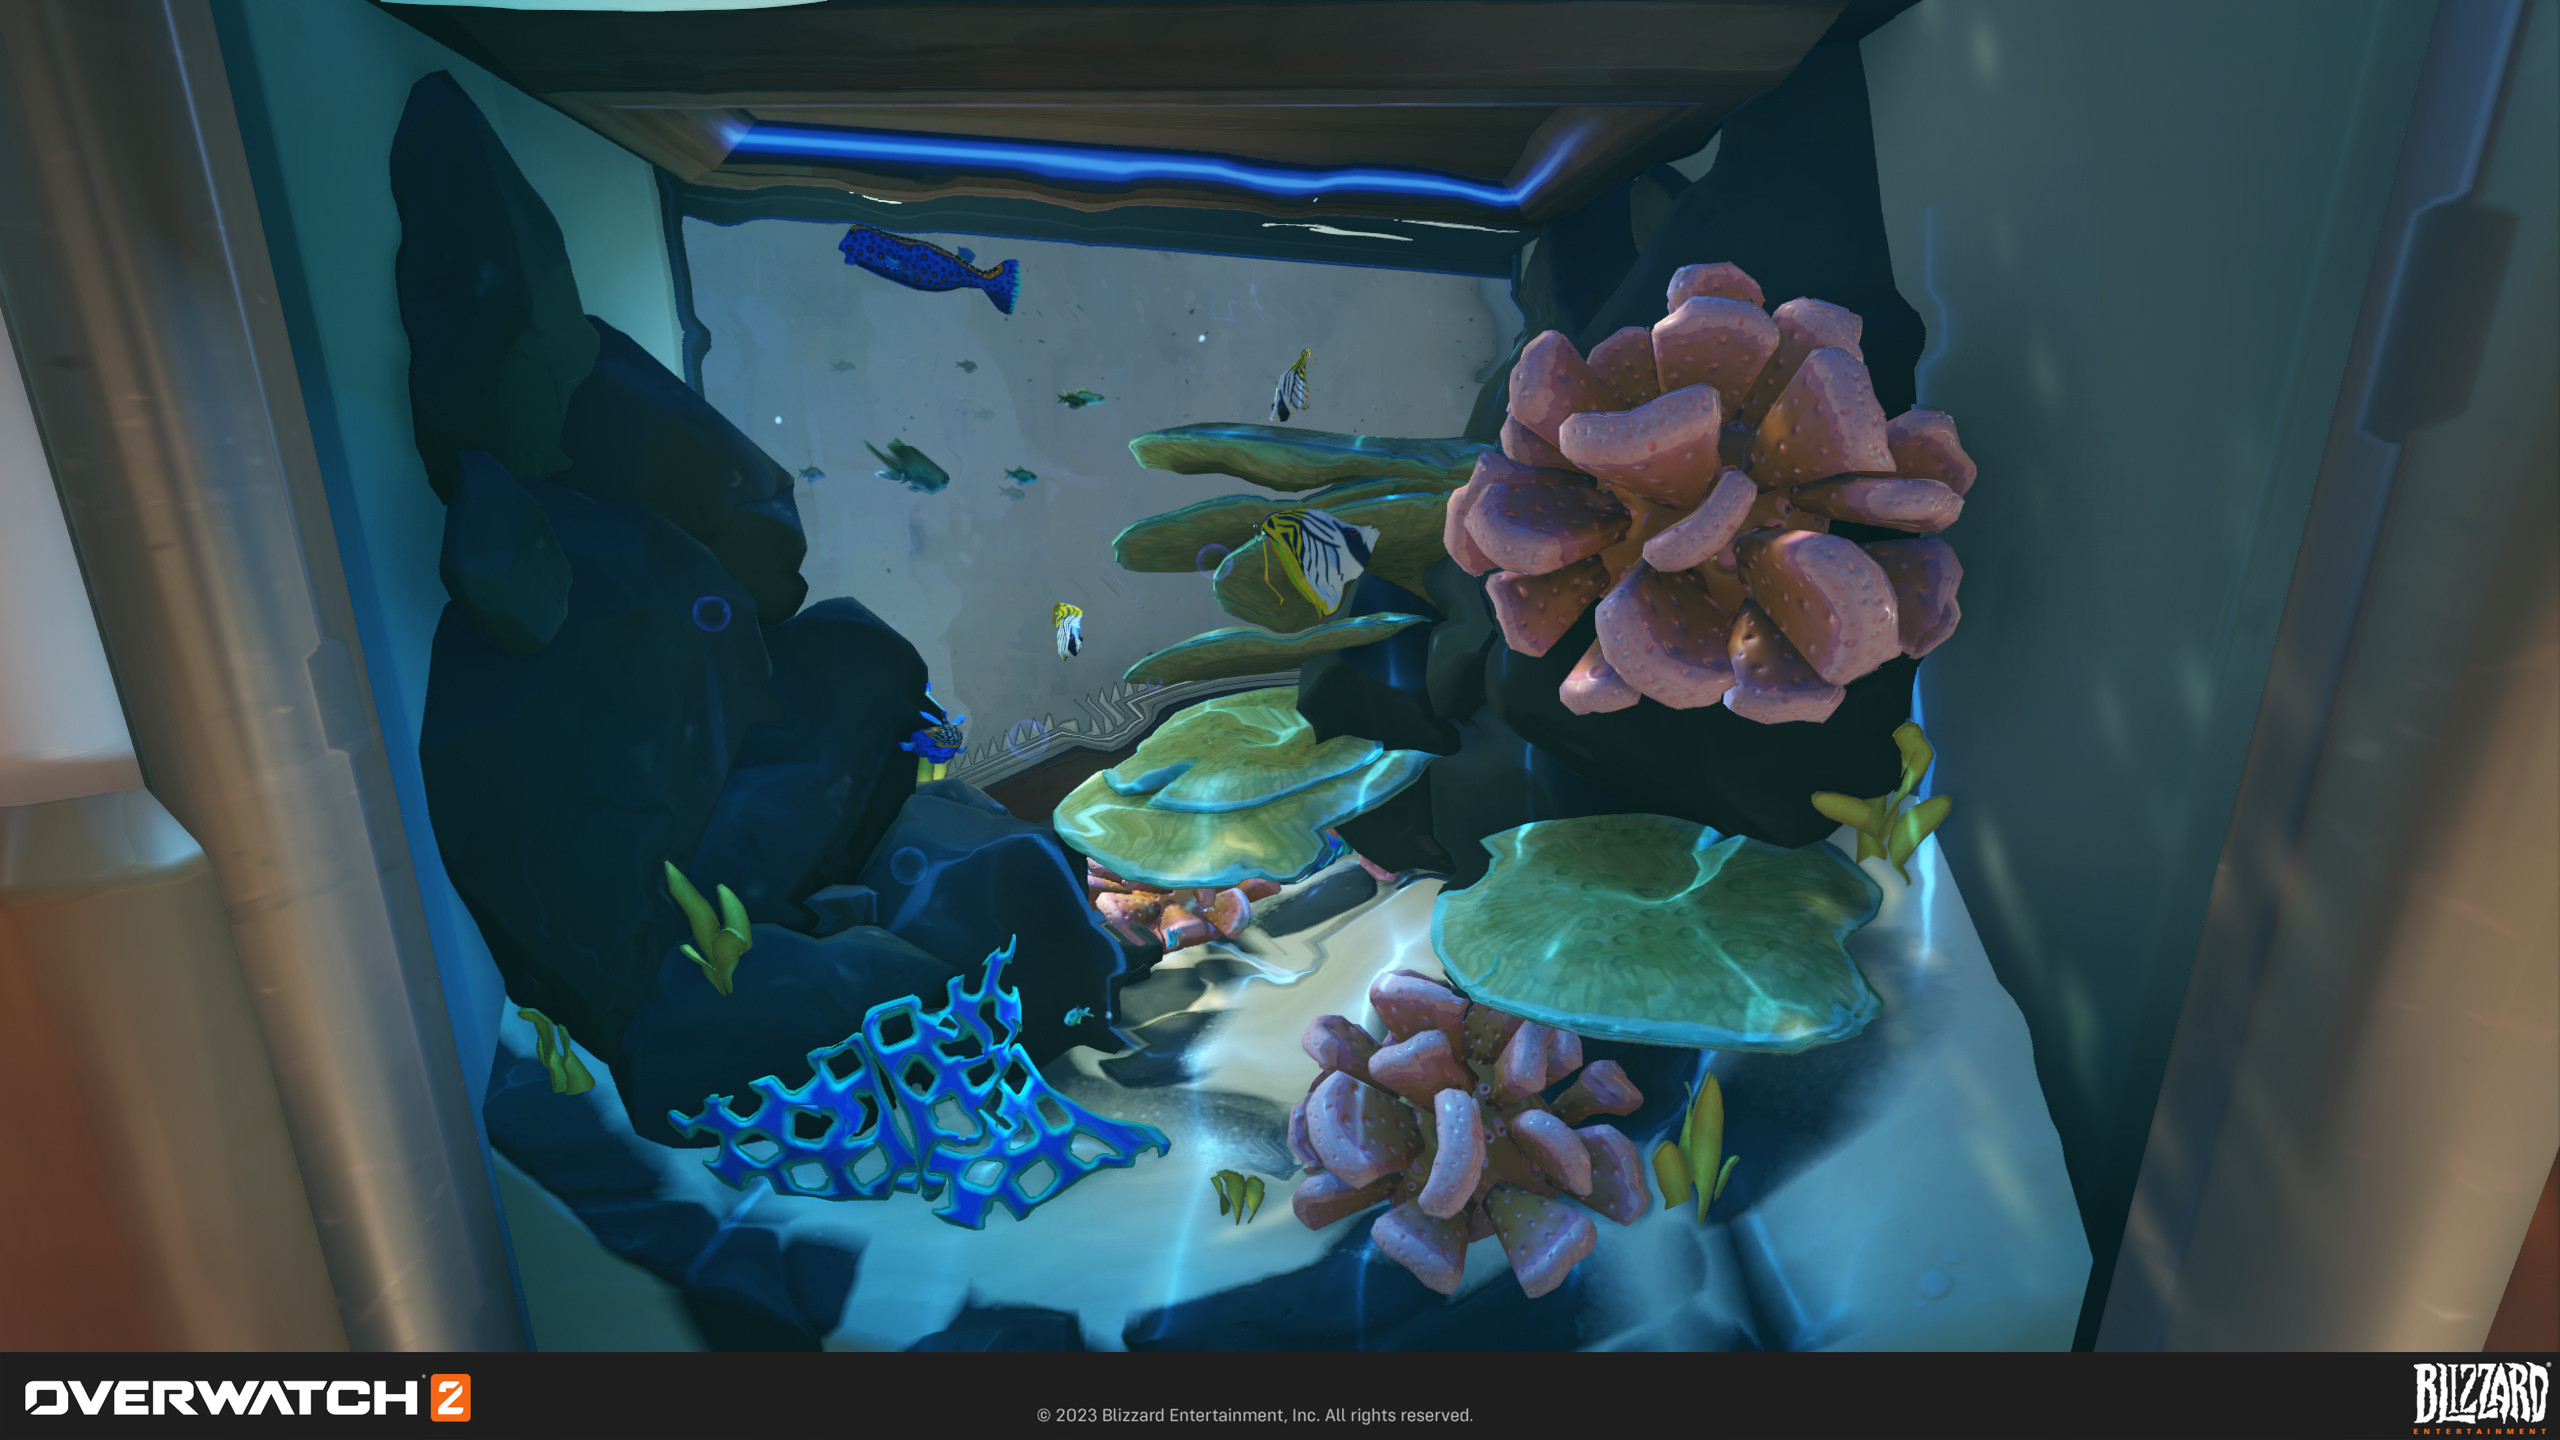 Each one of the corals were designed by me. The fish animate and are representative of the local speciation. All assets are handpainted. Vertex deformations were applied to help sell the idea of water.